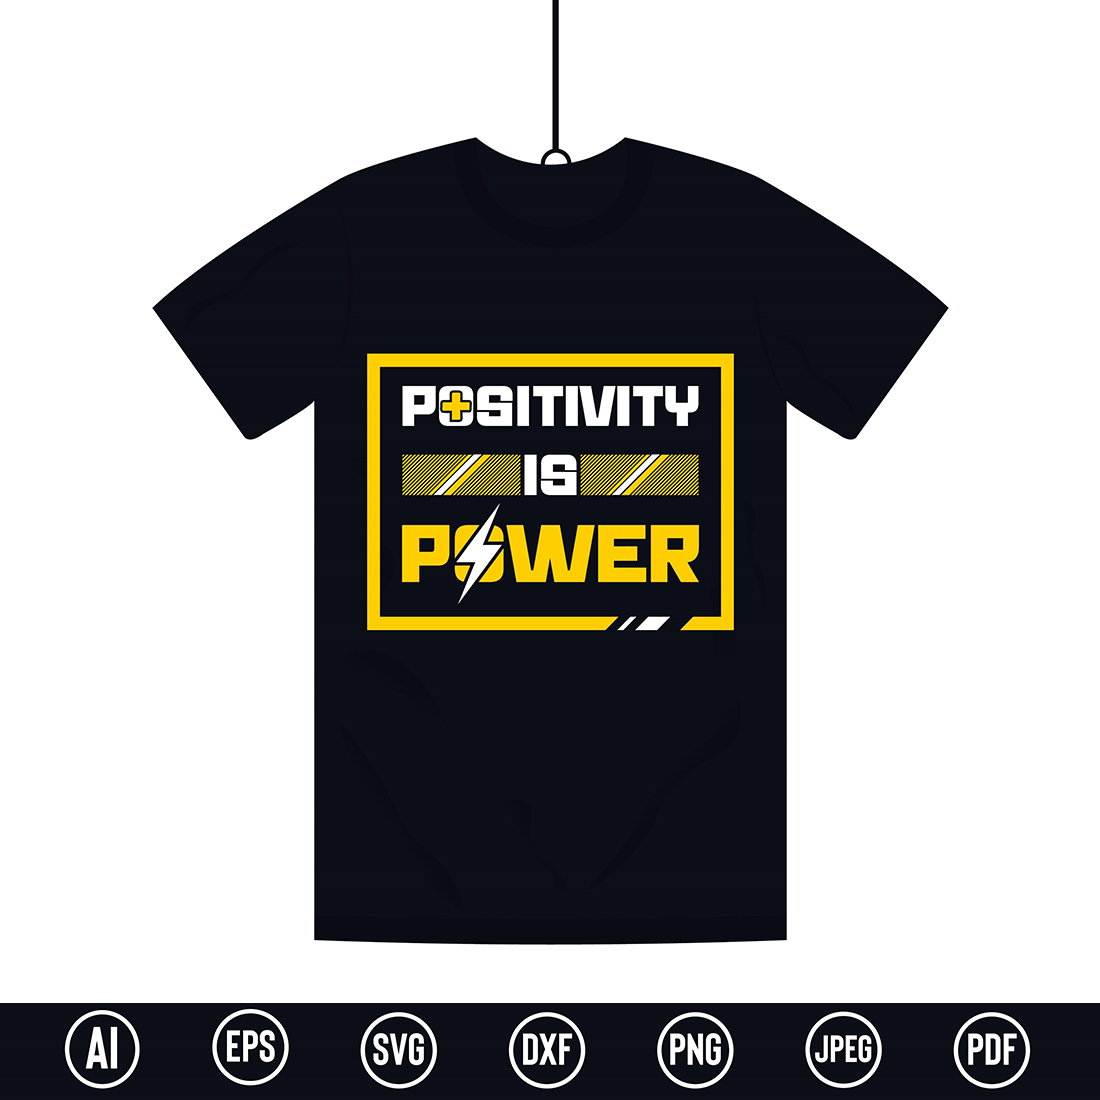 Modern Inspirational Typography T-Shirt design with “Positivity is Power” quote for t-shirt, posters, stickers, mug prints, banners, gift cards, labels etc cover image.